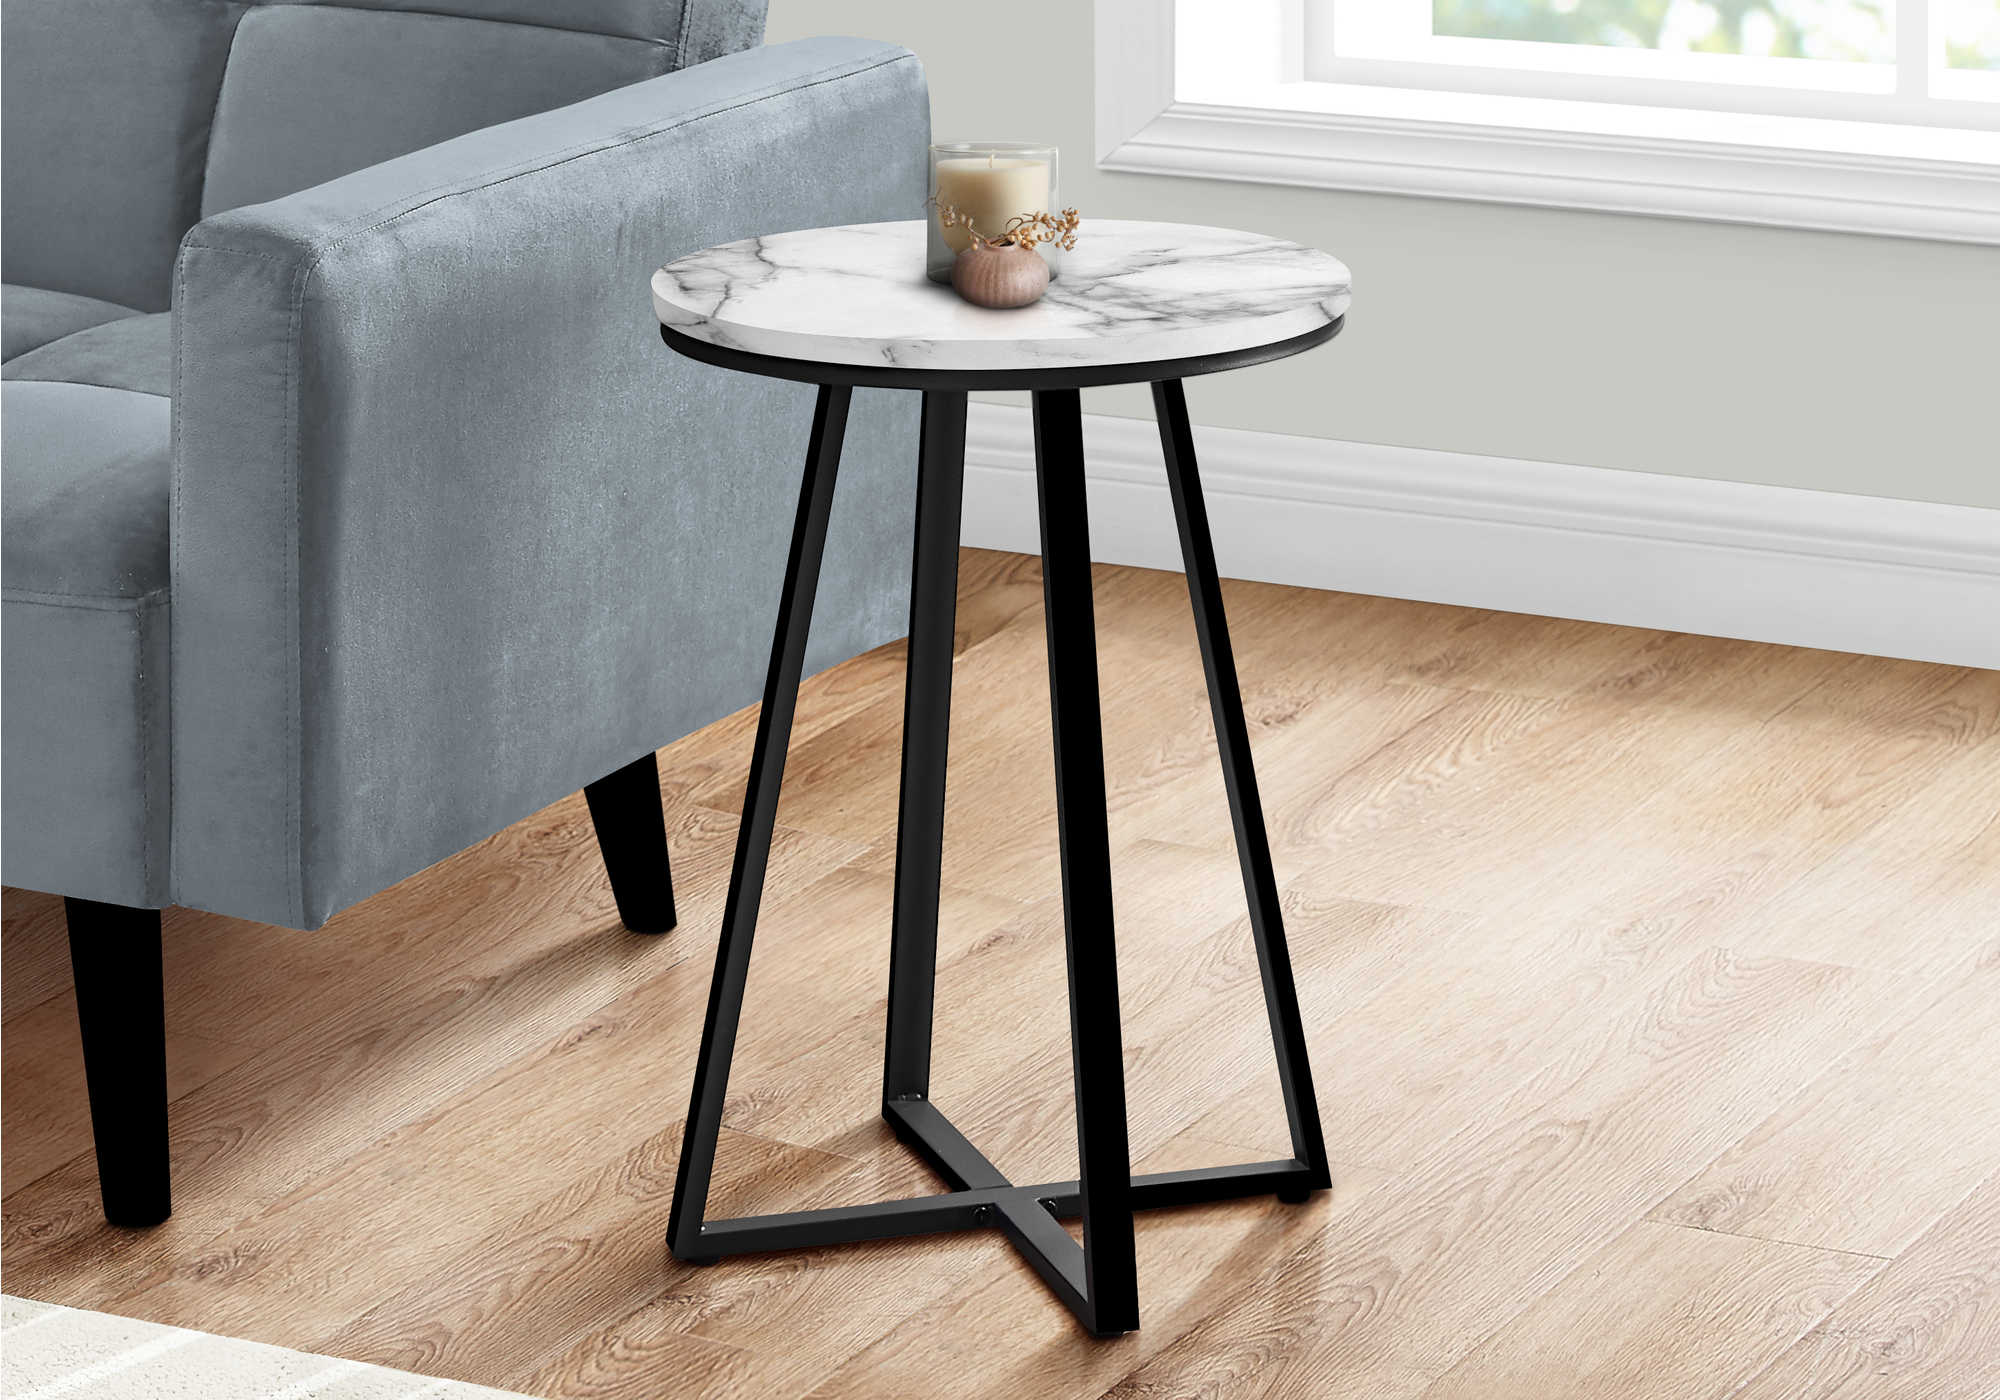 ACCENT TABLE - 22"H / WHITE MARBLE / BLACK METAL